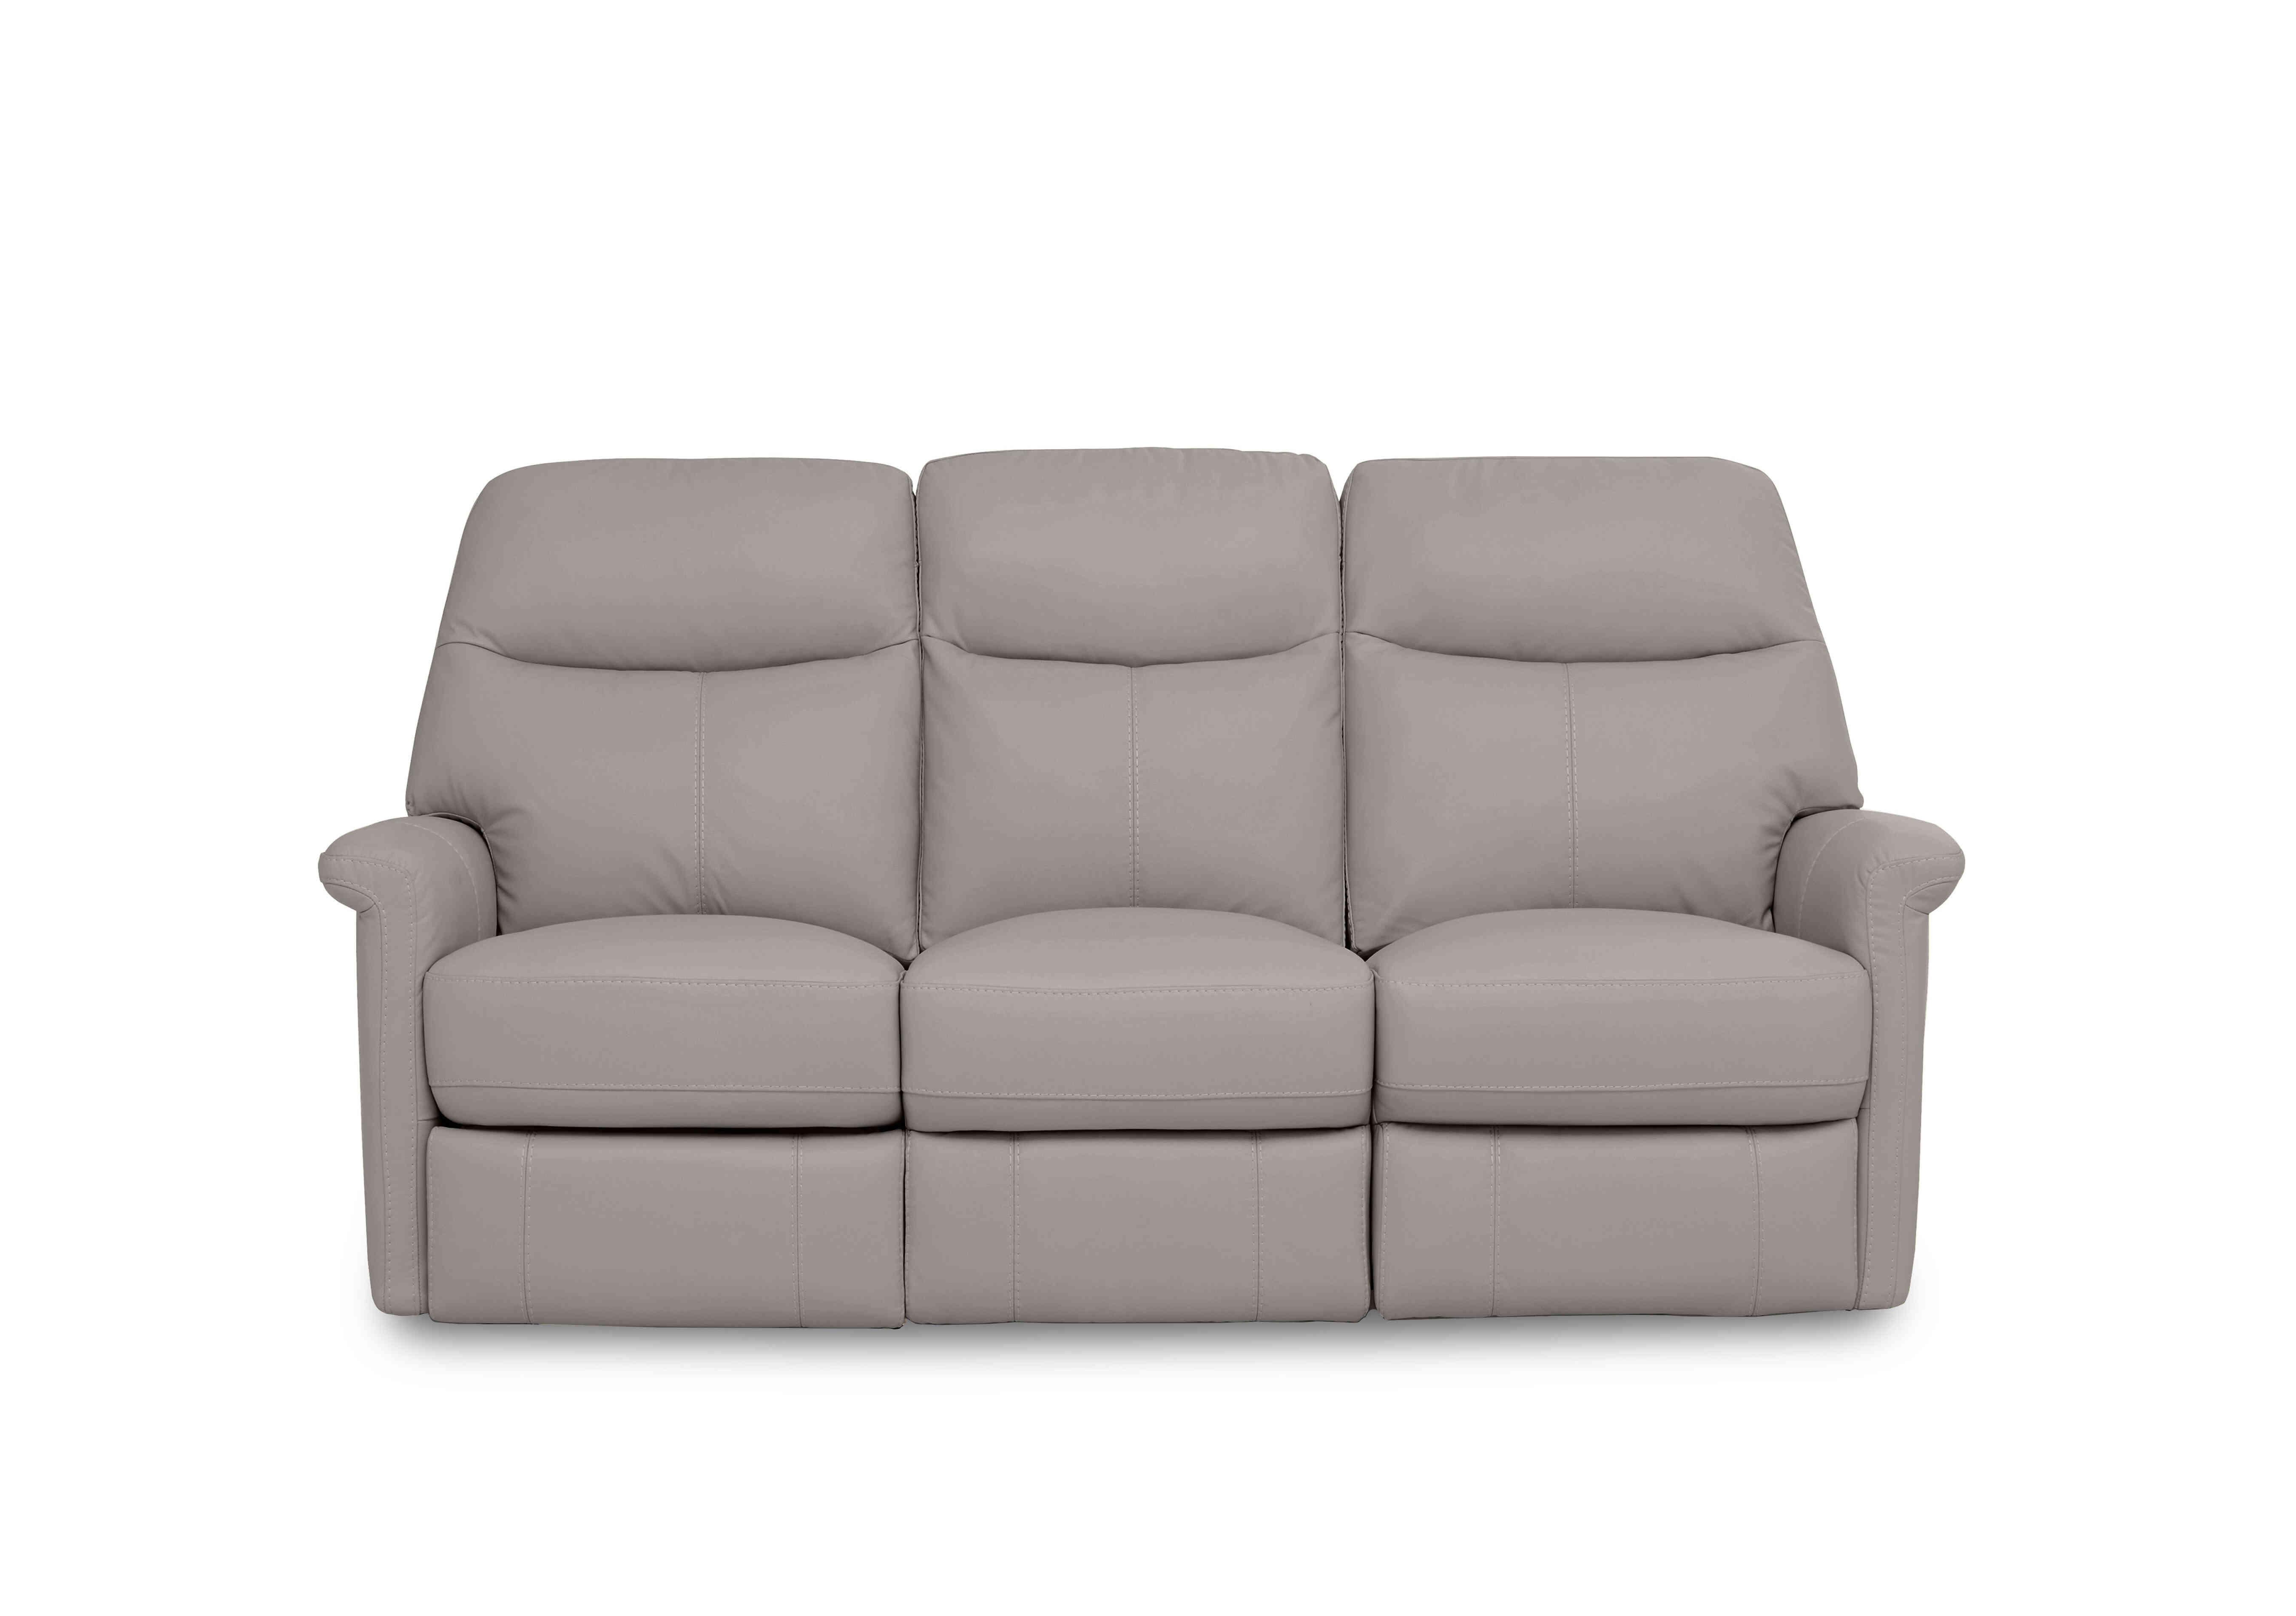 Compact Collection Lille 3 Seater Leather Sofa in Bv-946b Silver Grey on Furniture Village